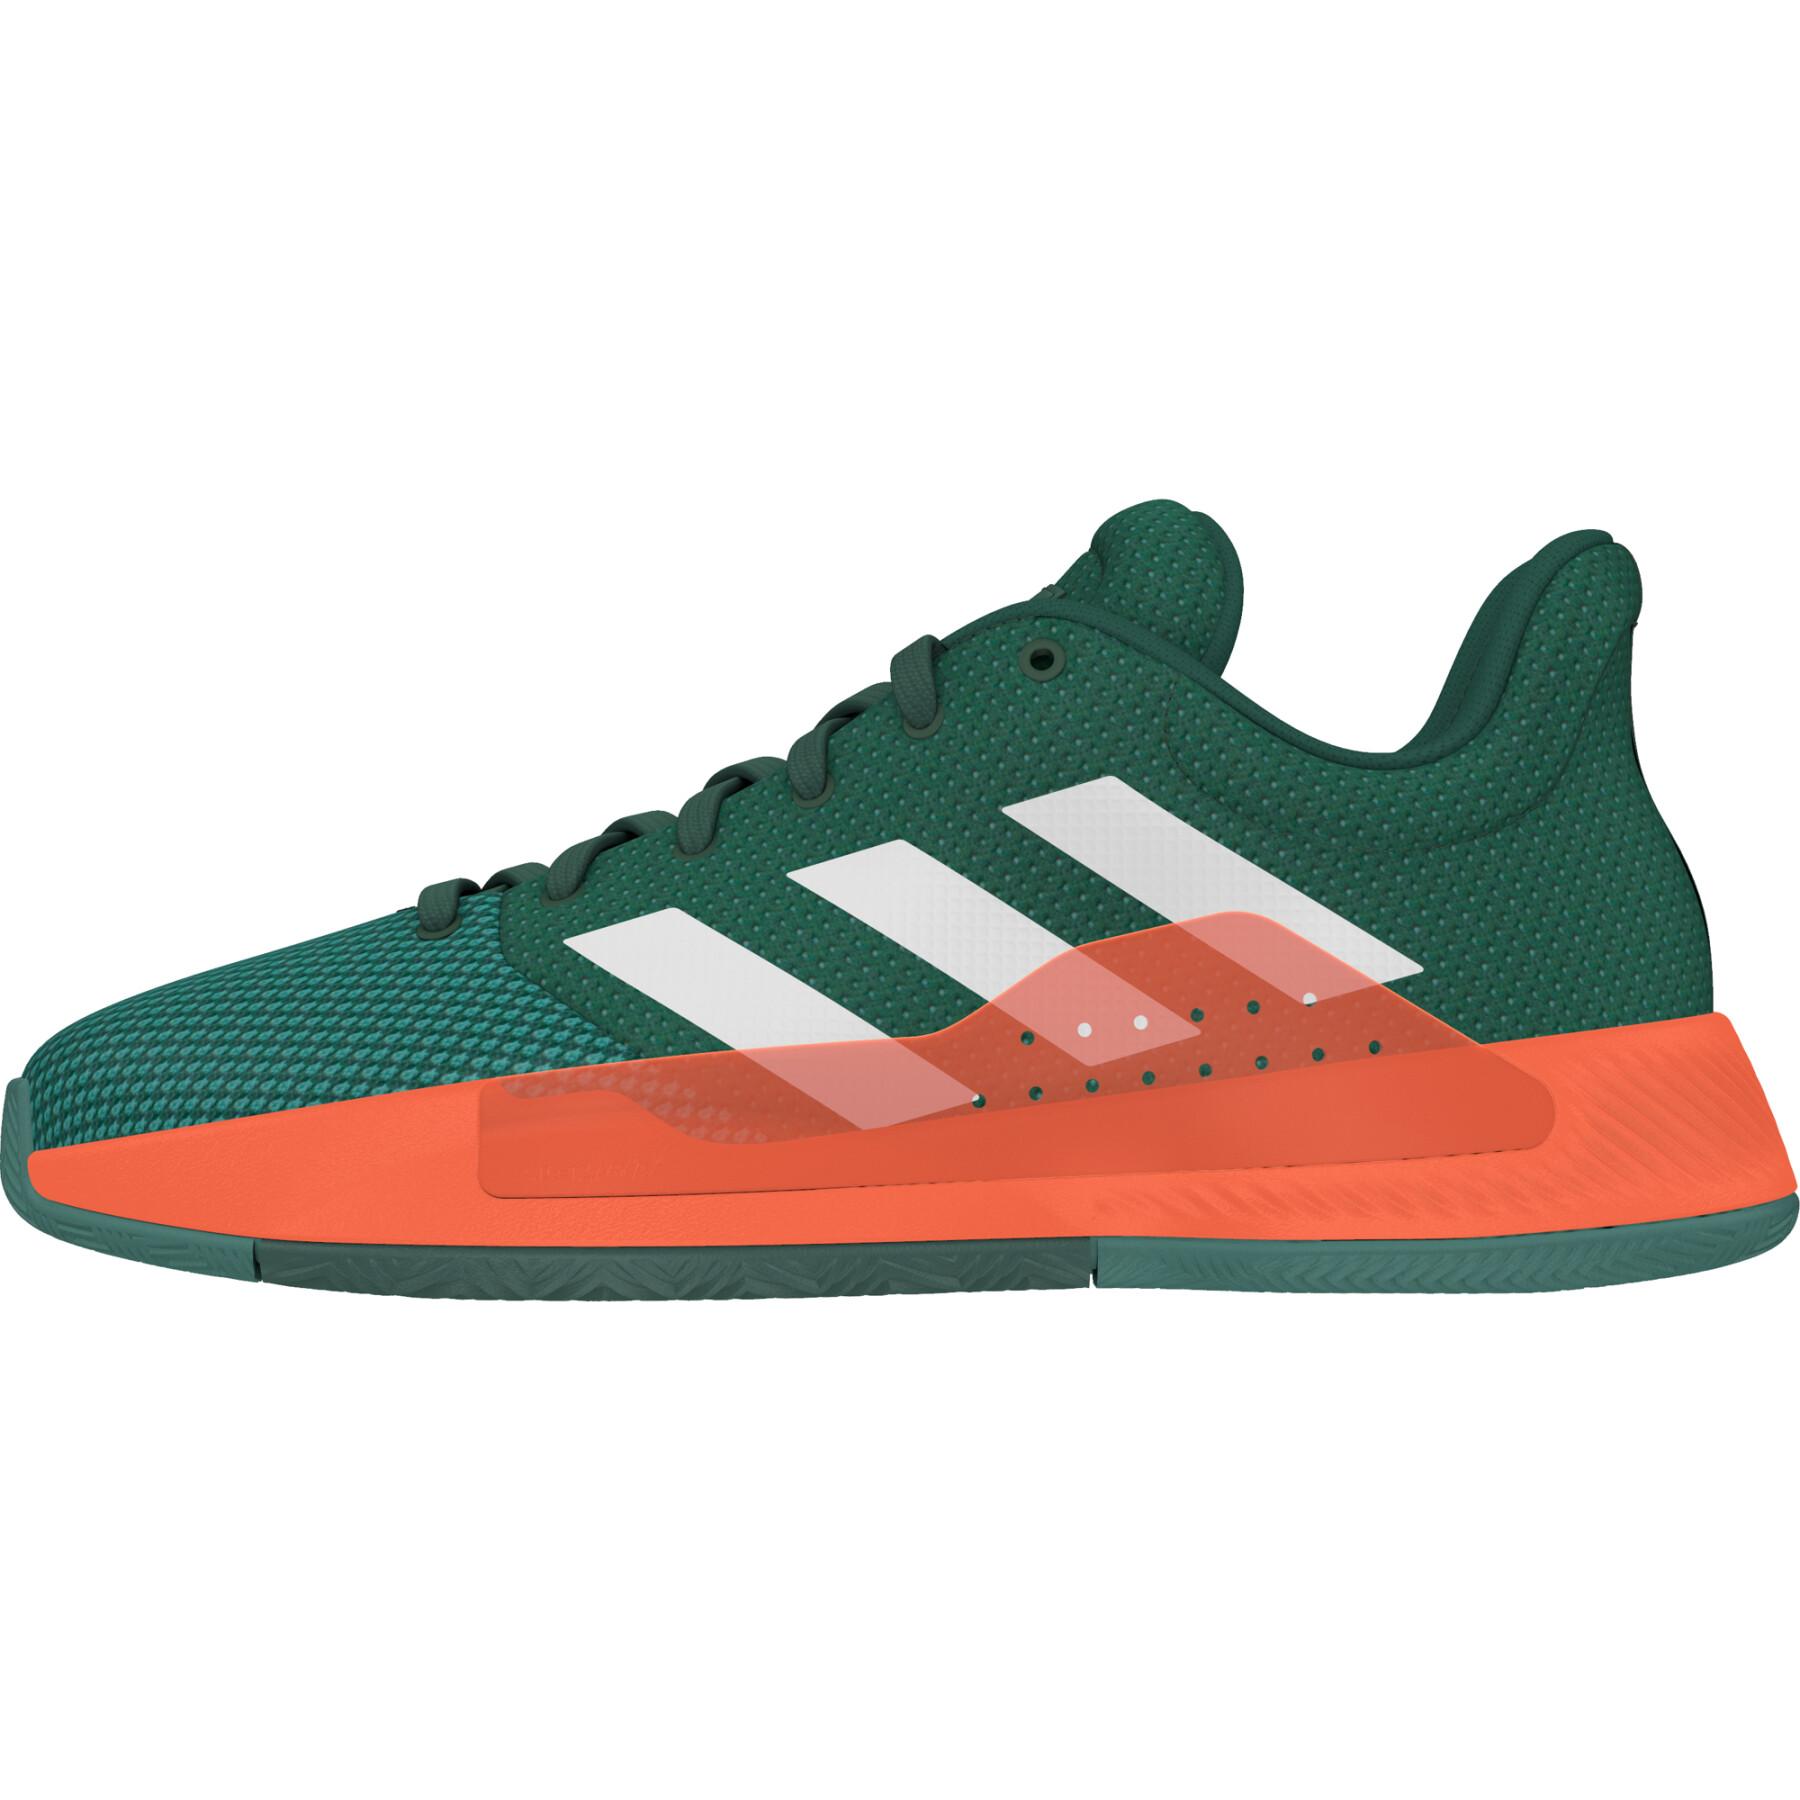 Indoor-Schuhe adidas Pro bounce madness 2019